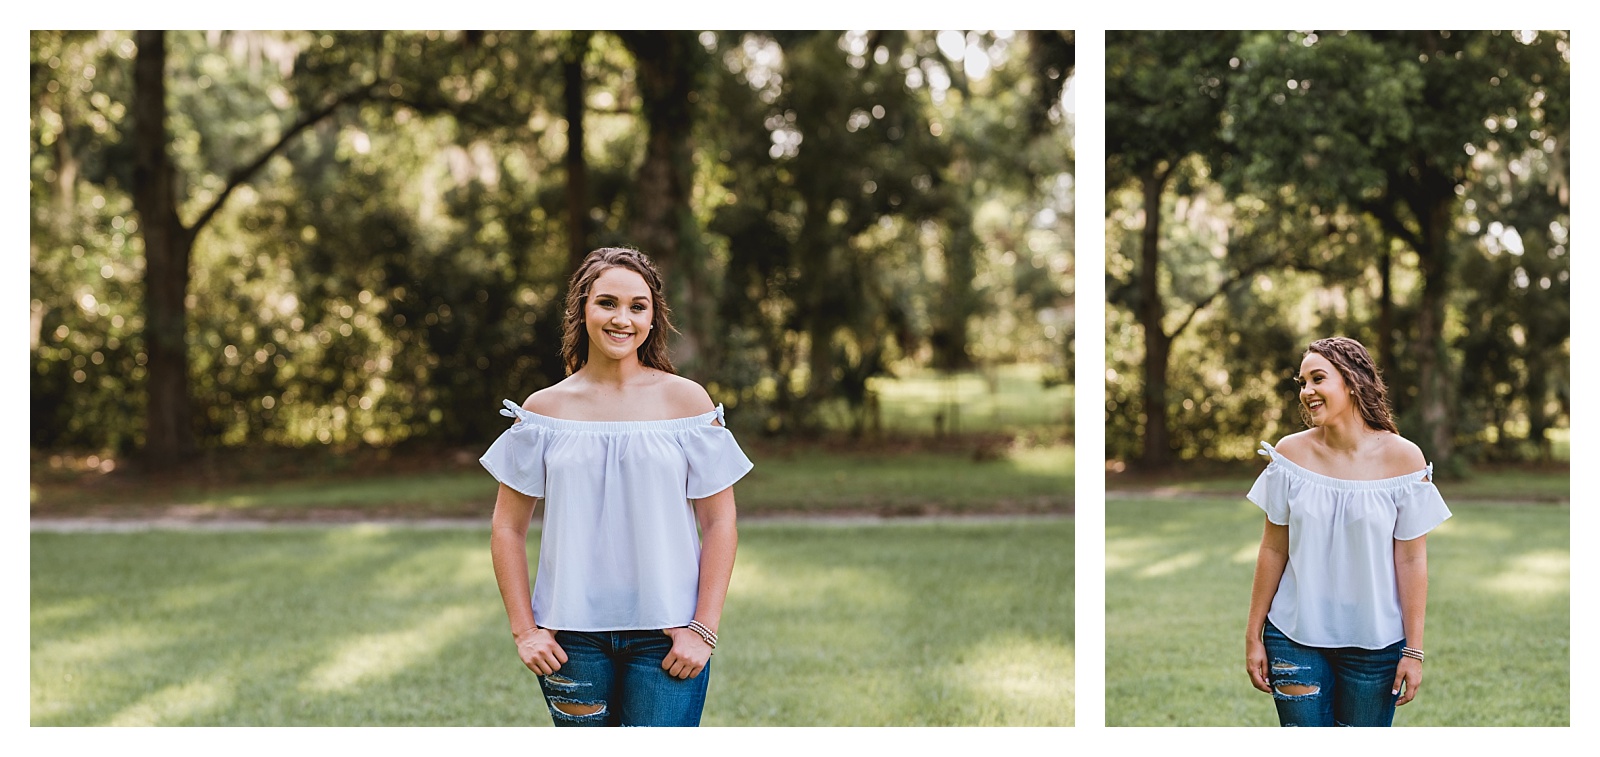 Simple senior photos in North Florida. Shelly Williams Photography